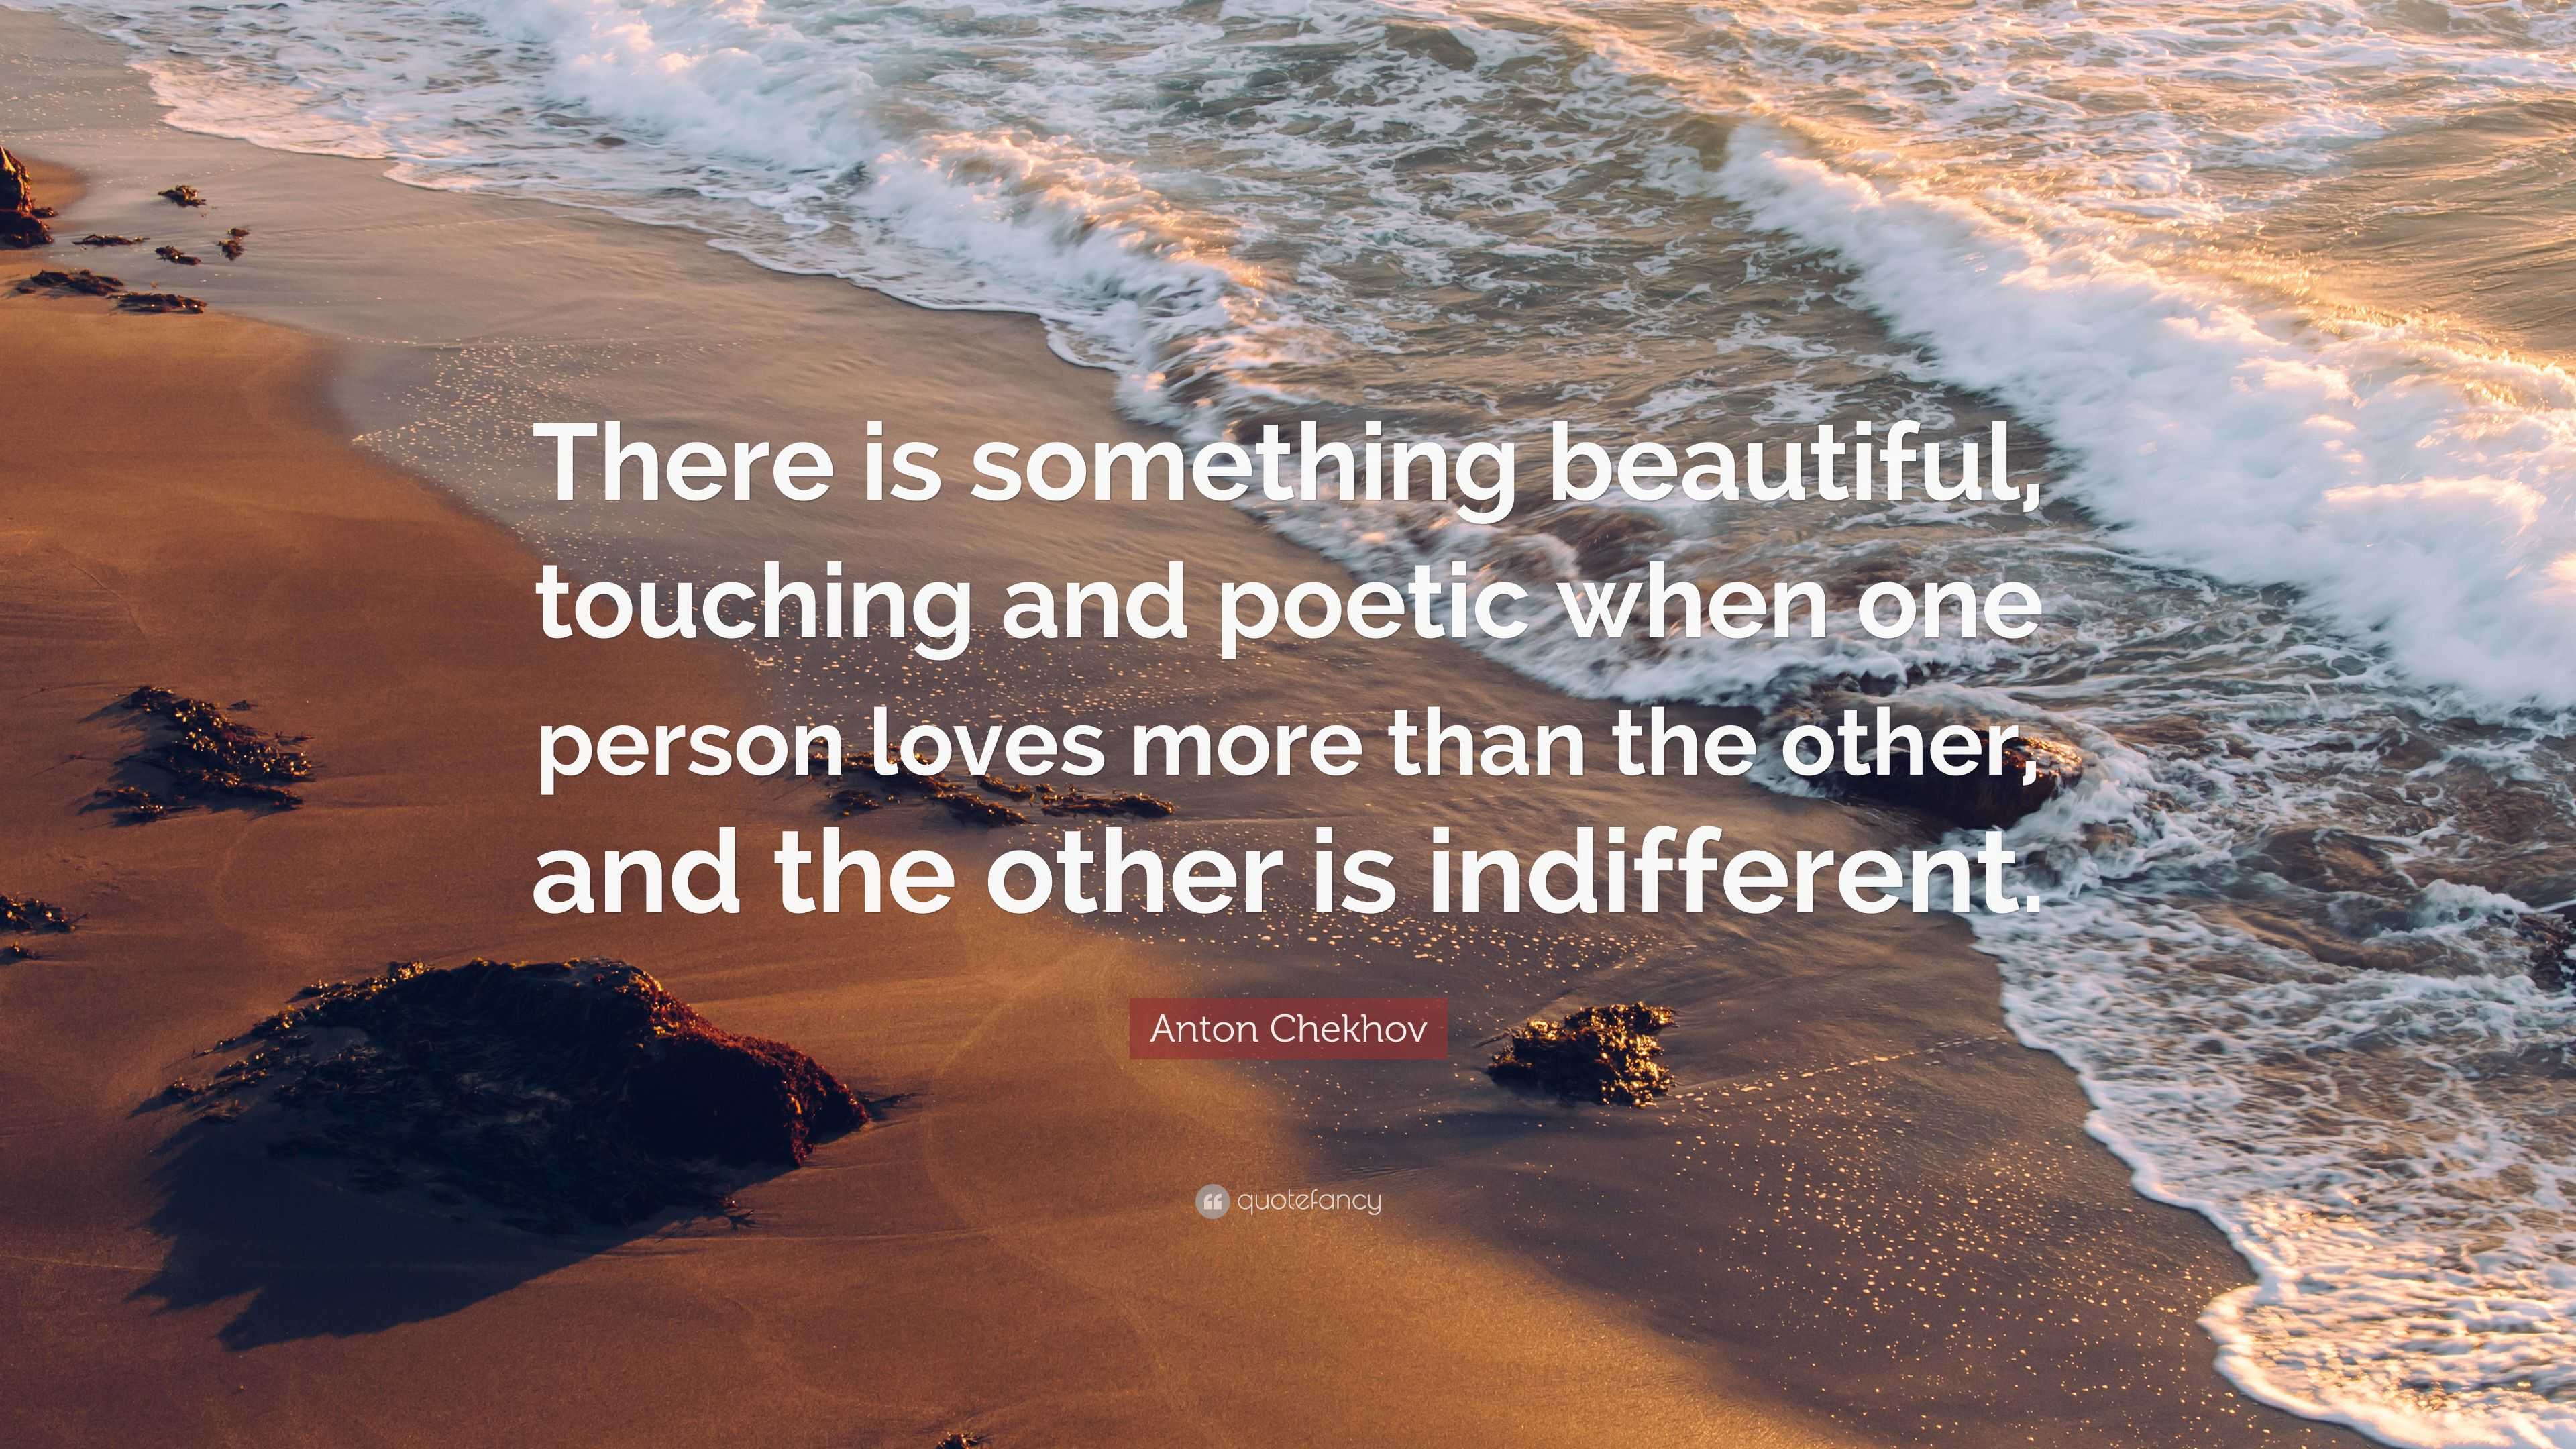 Anton Chekhov Quote: “There is something beautiful, touching and poetic ...